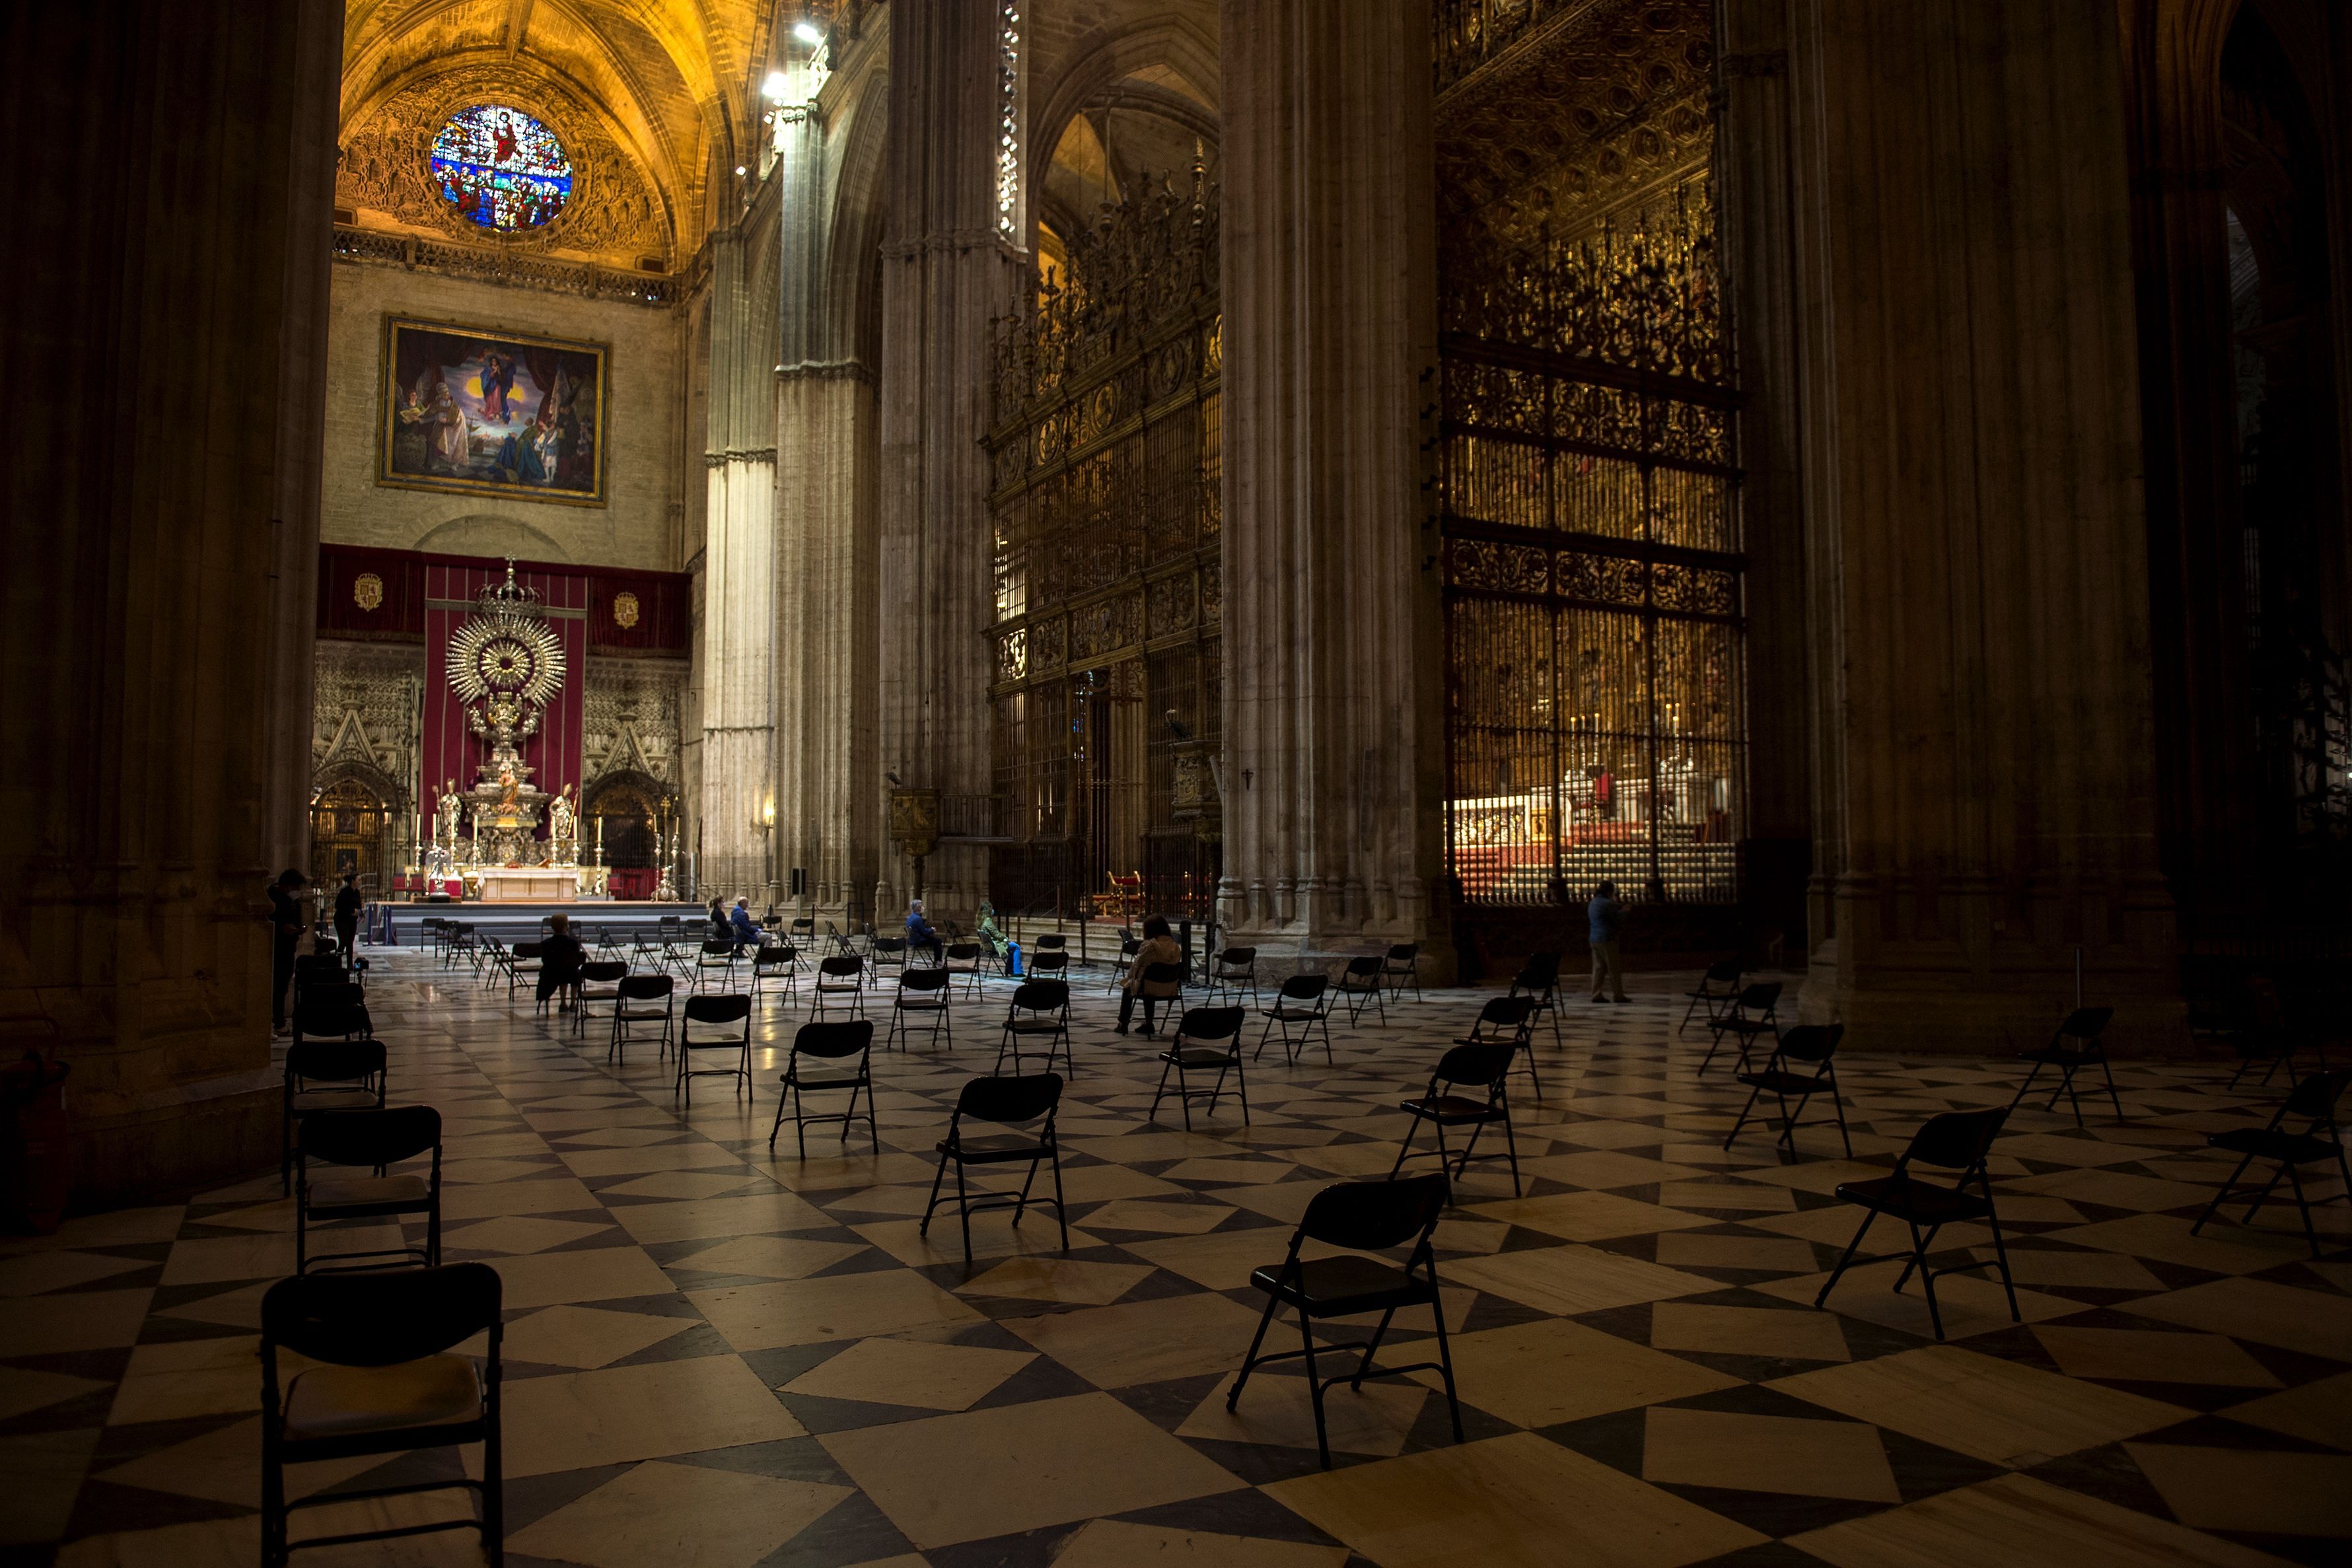 People pray at the Cathedral of Sevilla, Spain. (AFP photo)